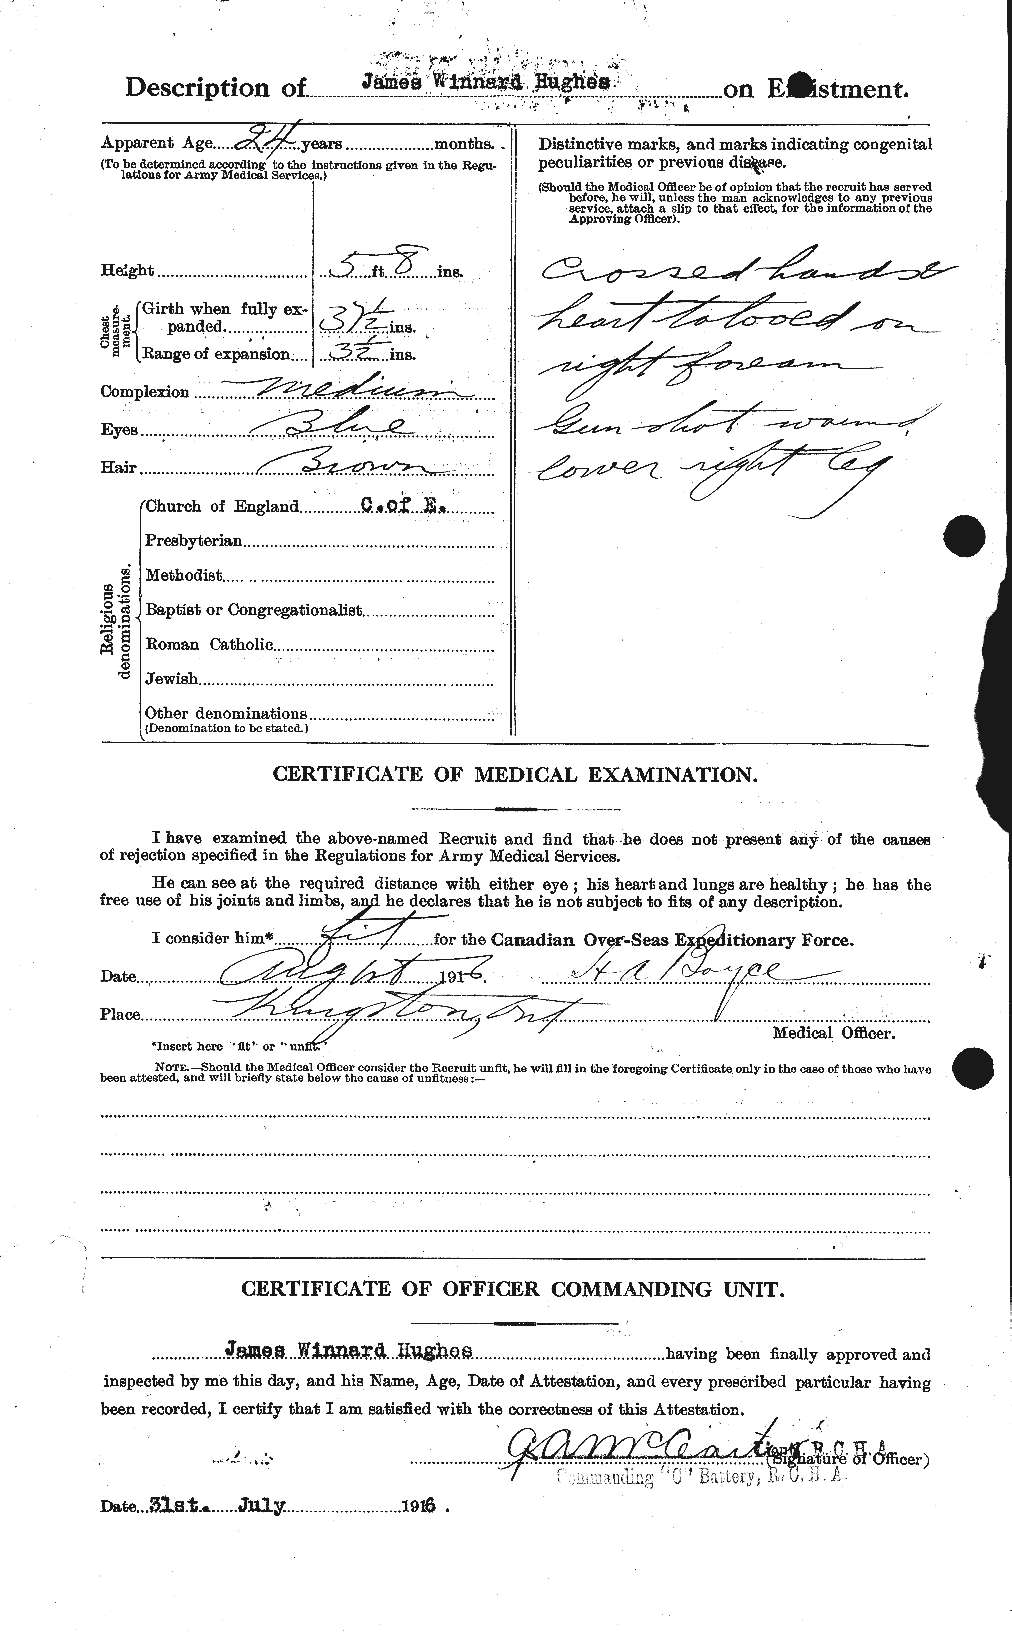 Personnel Records of the First World War - CEF 403974b